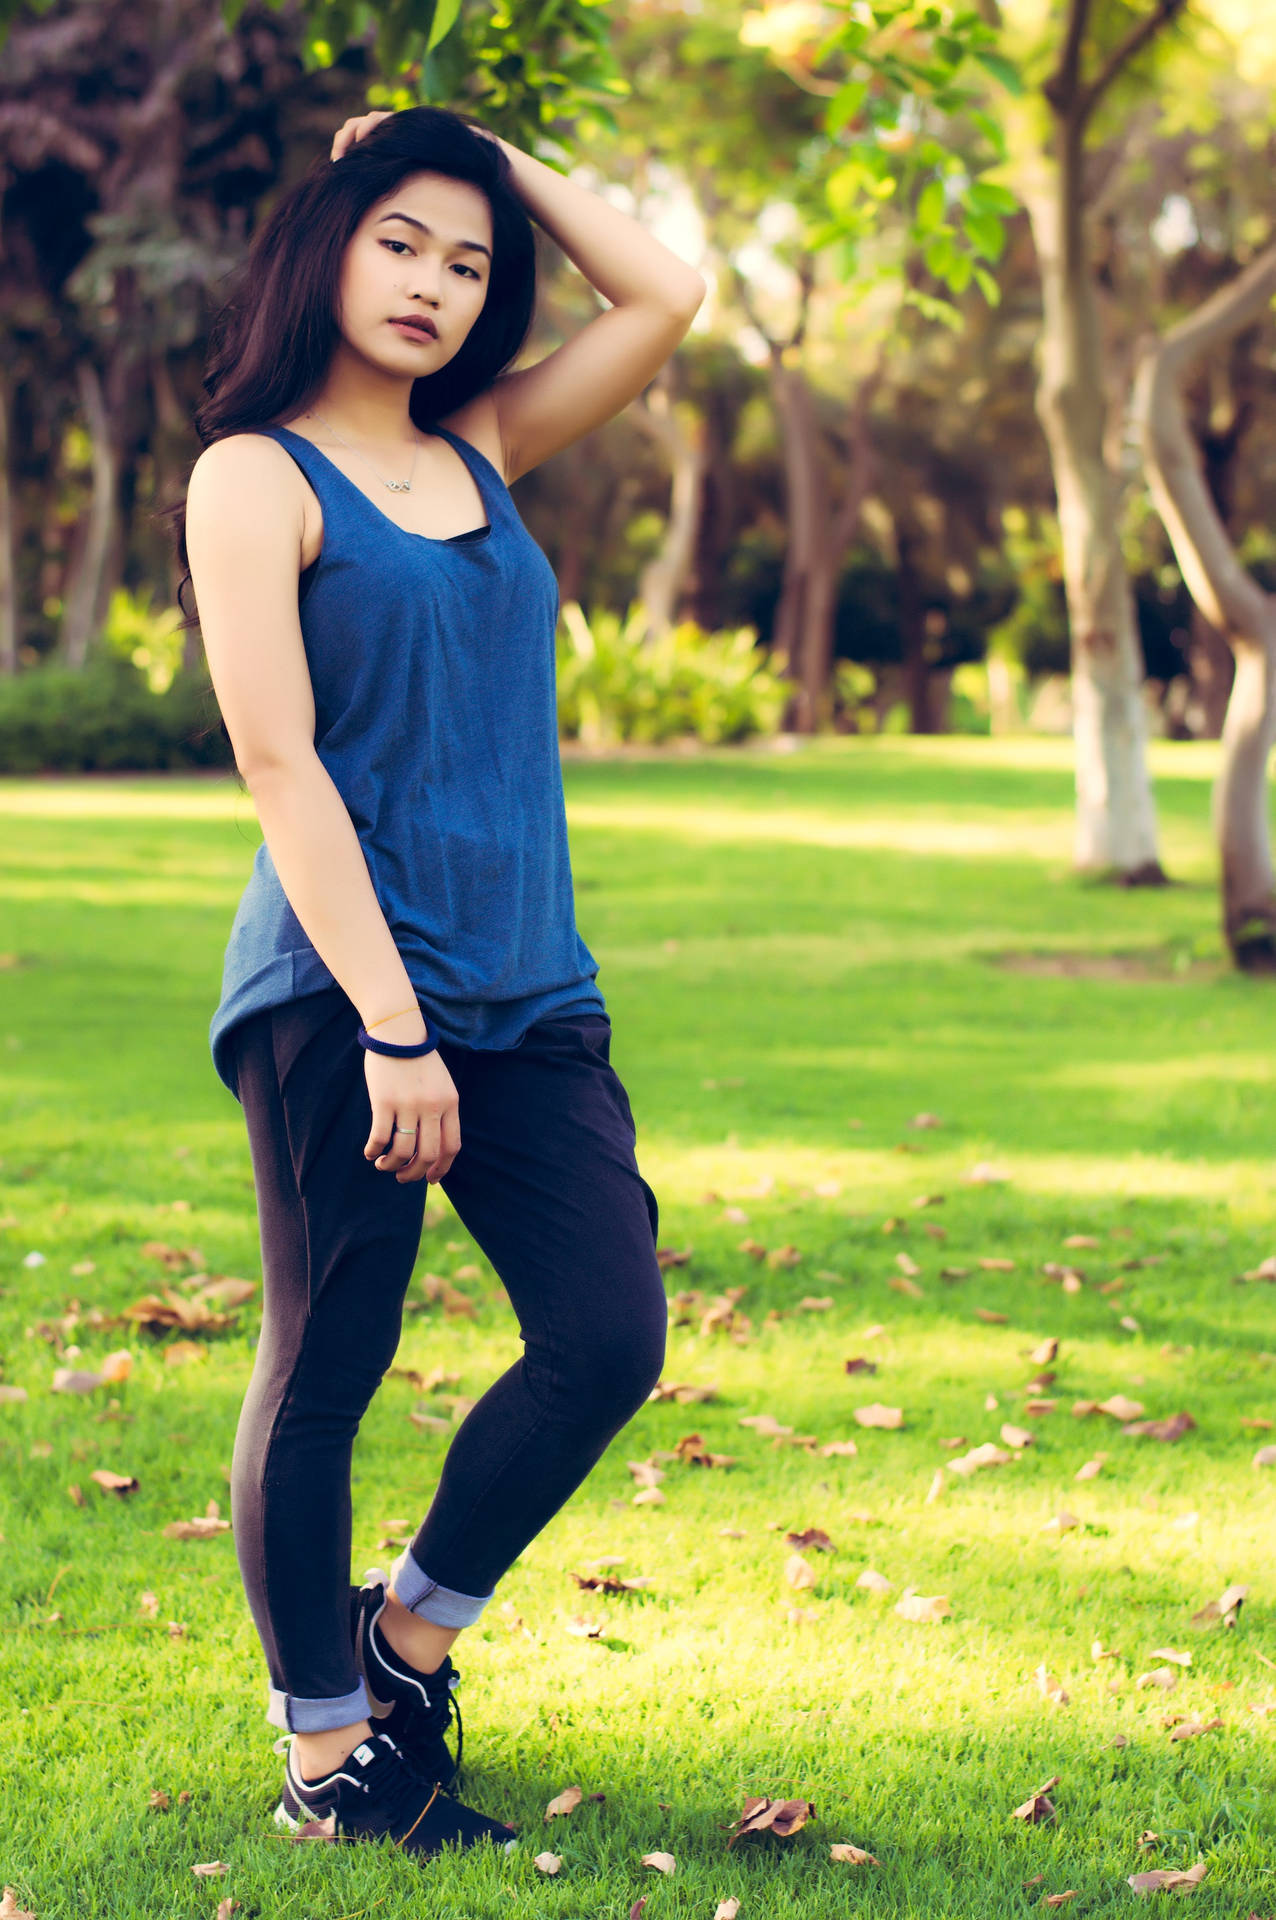 Asian Woman In Blue Tank Top Background